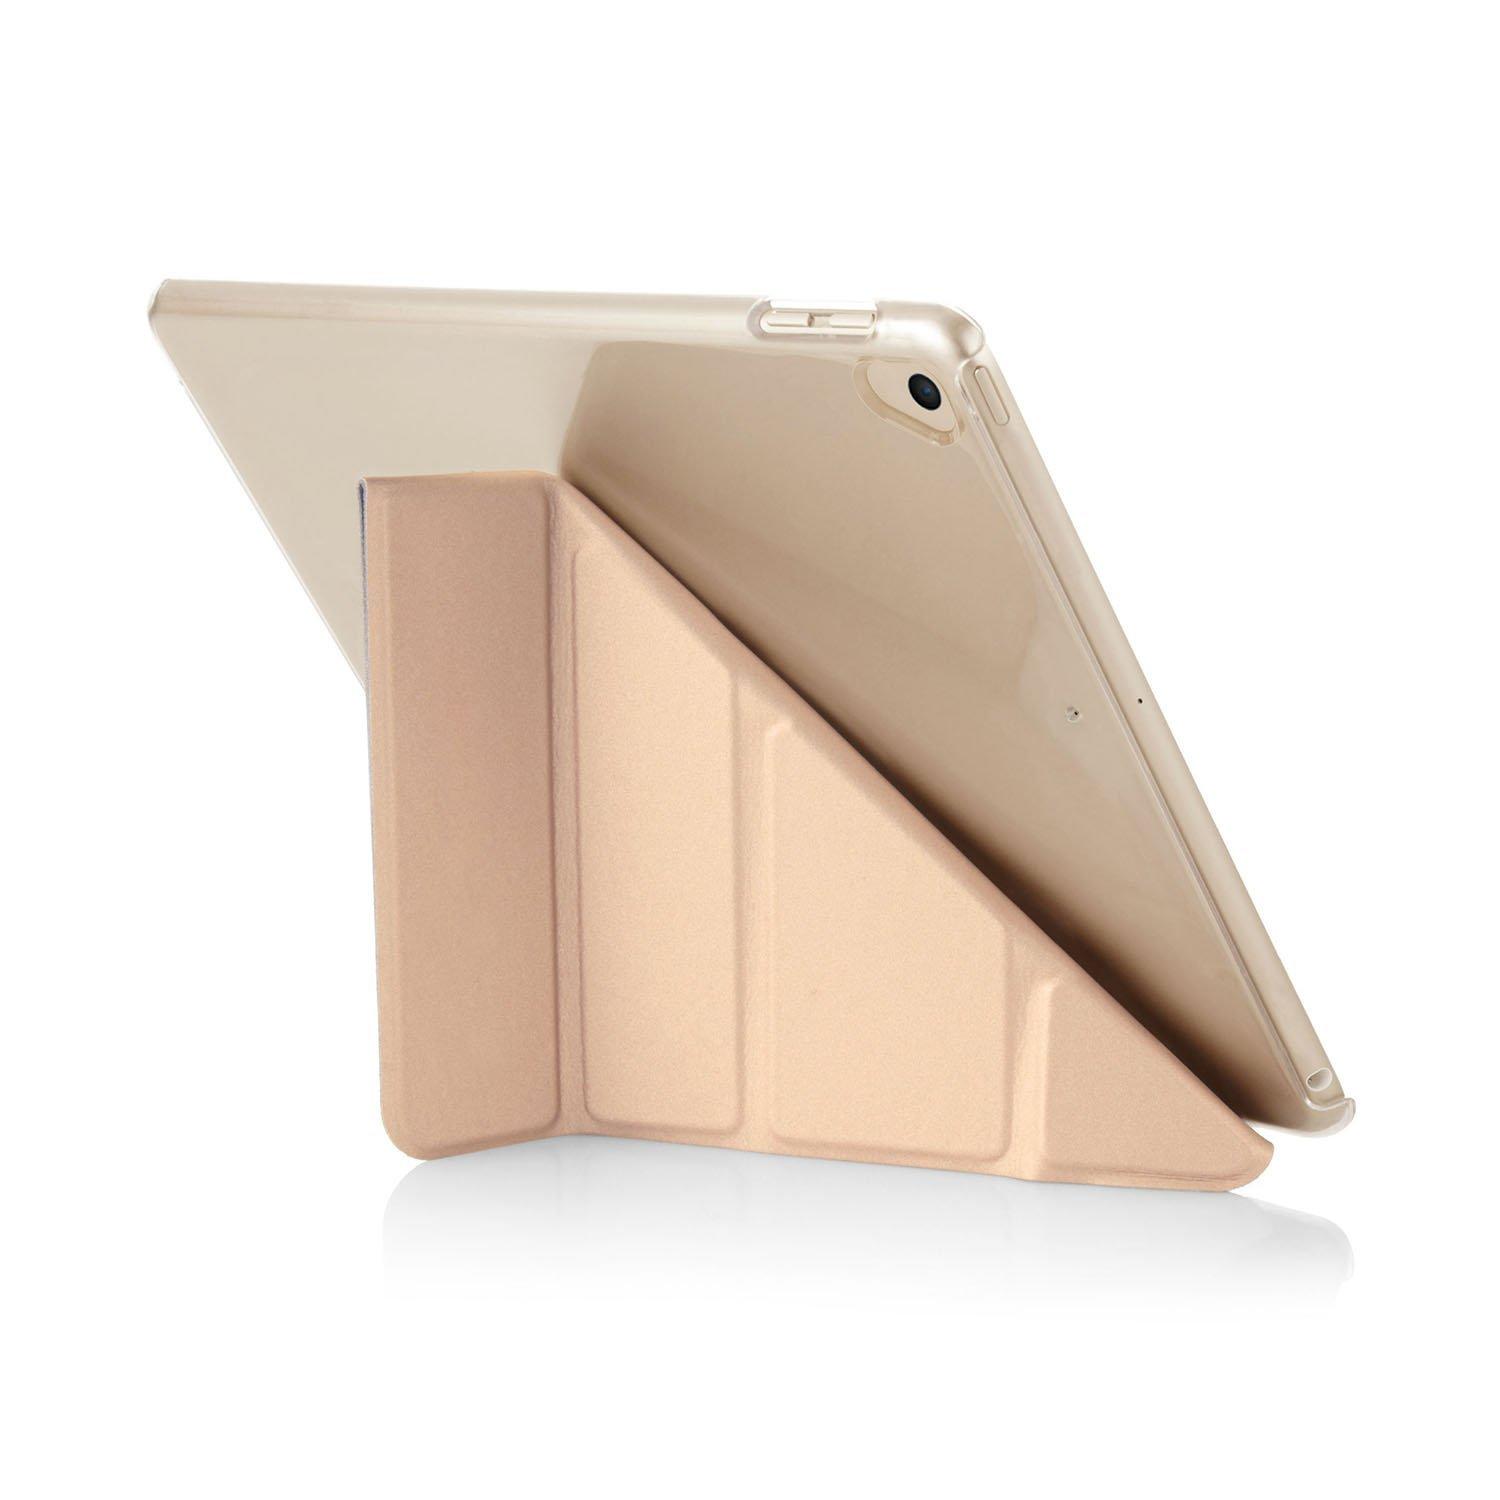 Ipad 9.7 case origami champagne gold & clear at Radioworld UK